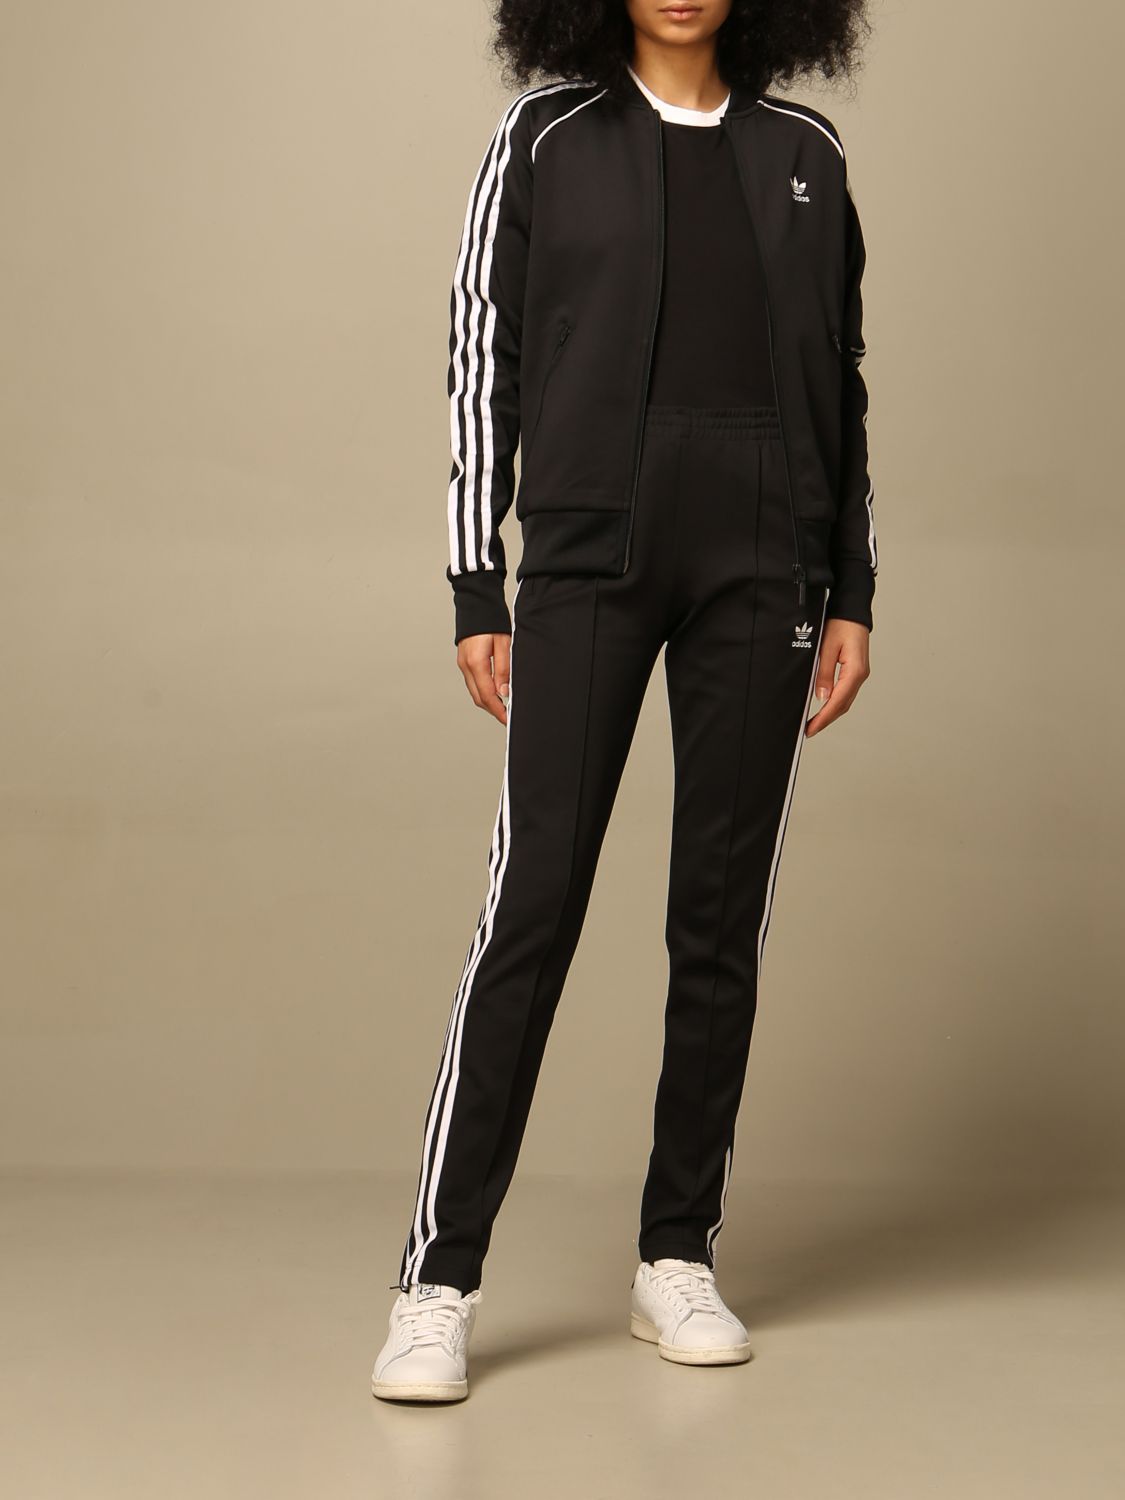 ADIDAS ORIGINALS: jogging trousers with striped bands | Pants Adidas ...